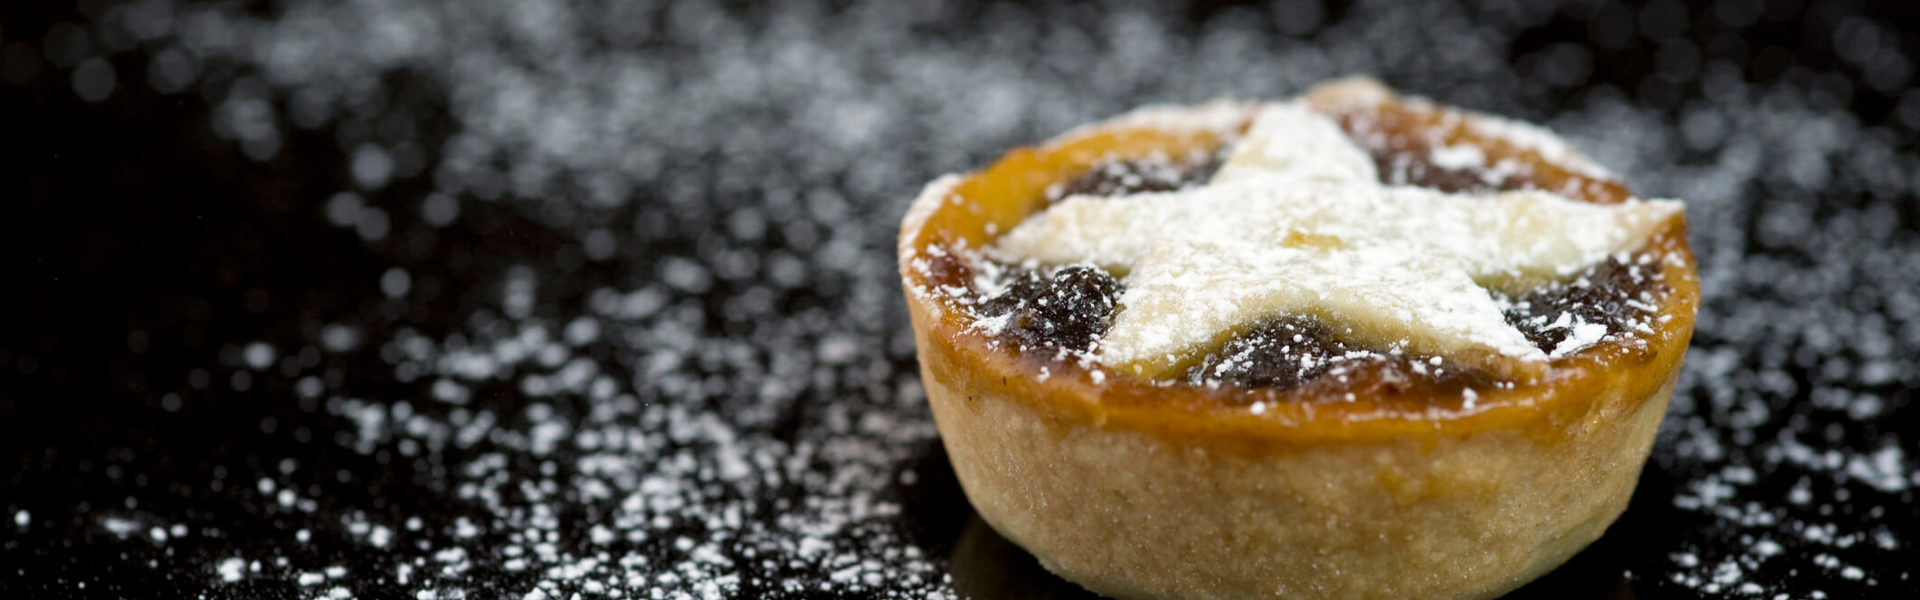 a close up of a mini mince pie with a star shaped top dusted with icing sugar